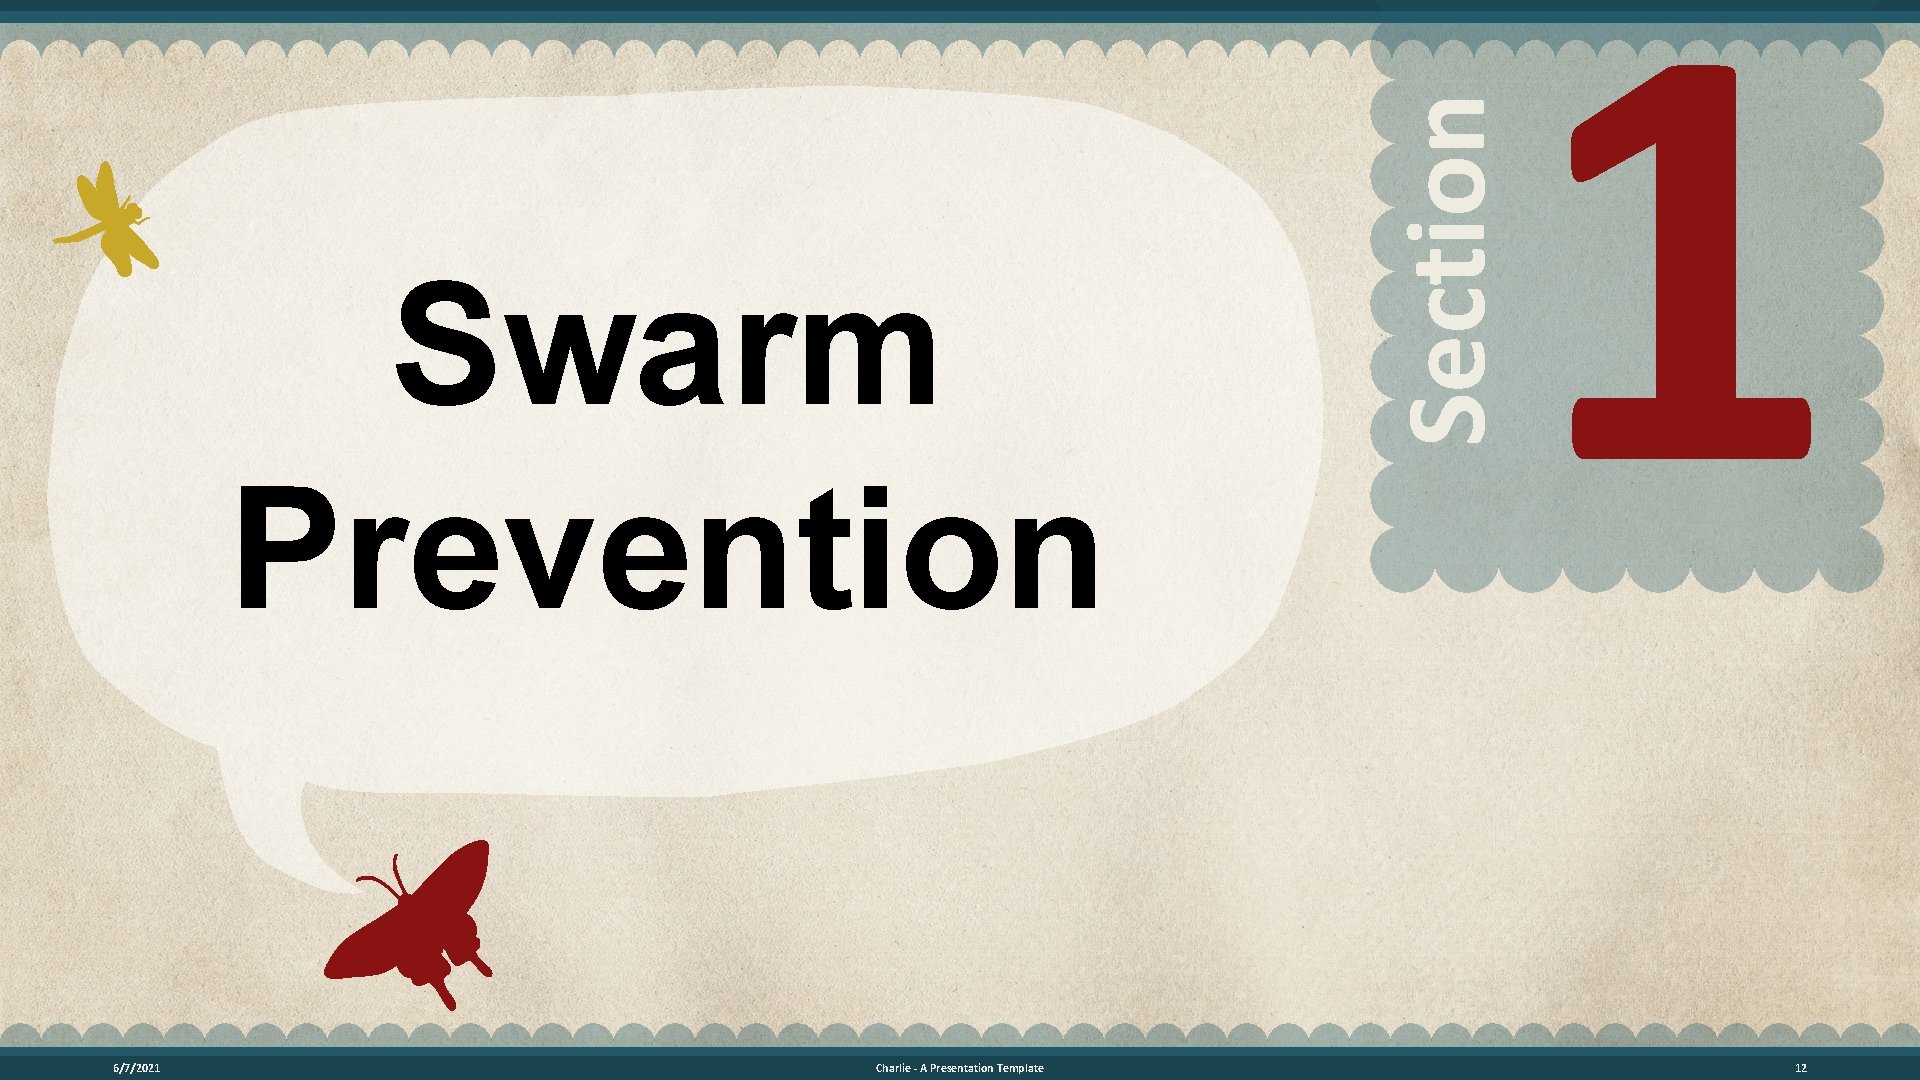 6/7/2021 Charlie - A Presentation Template Section Swarm Prevention 1 12 